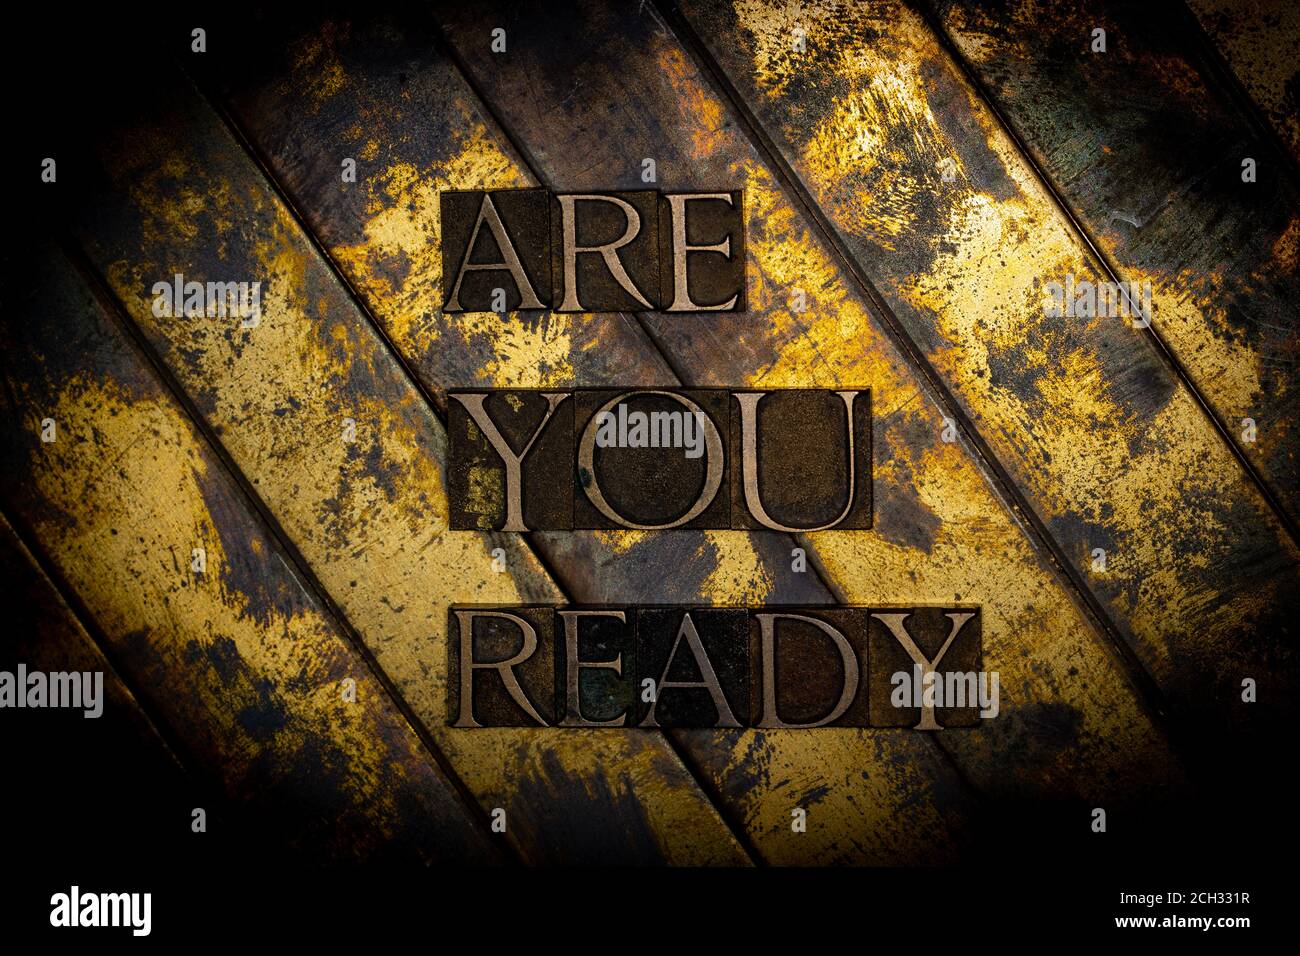 Are You Ready text formed with real authentic typeset letters on vintage textured silver grunge copper and gold background Stock Photo